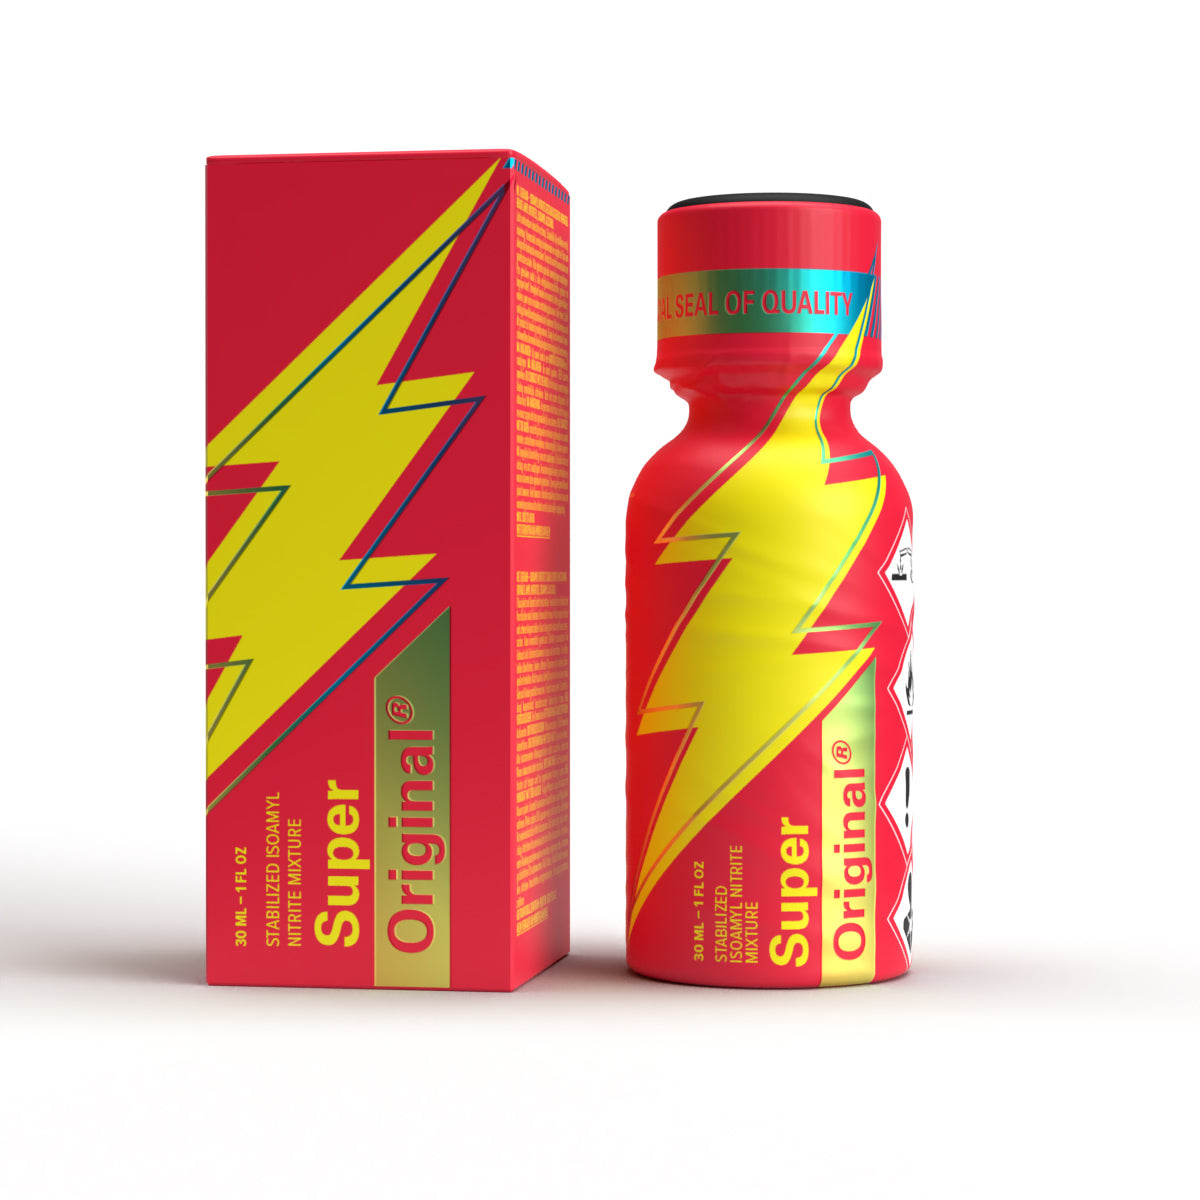 A product photo of a 30ml bottle of Super Original Poppers.